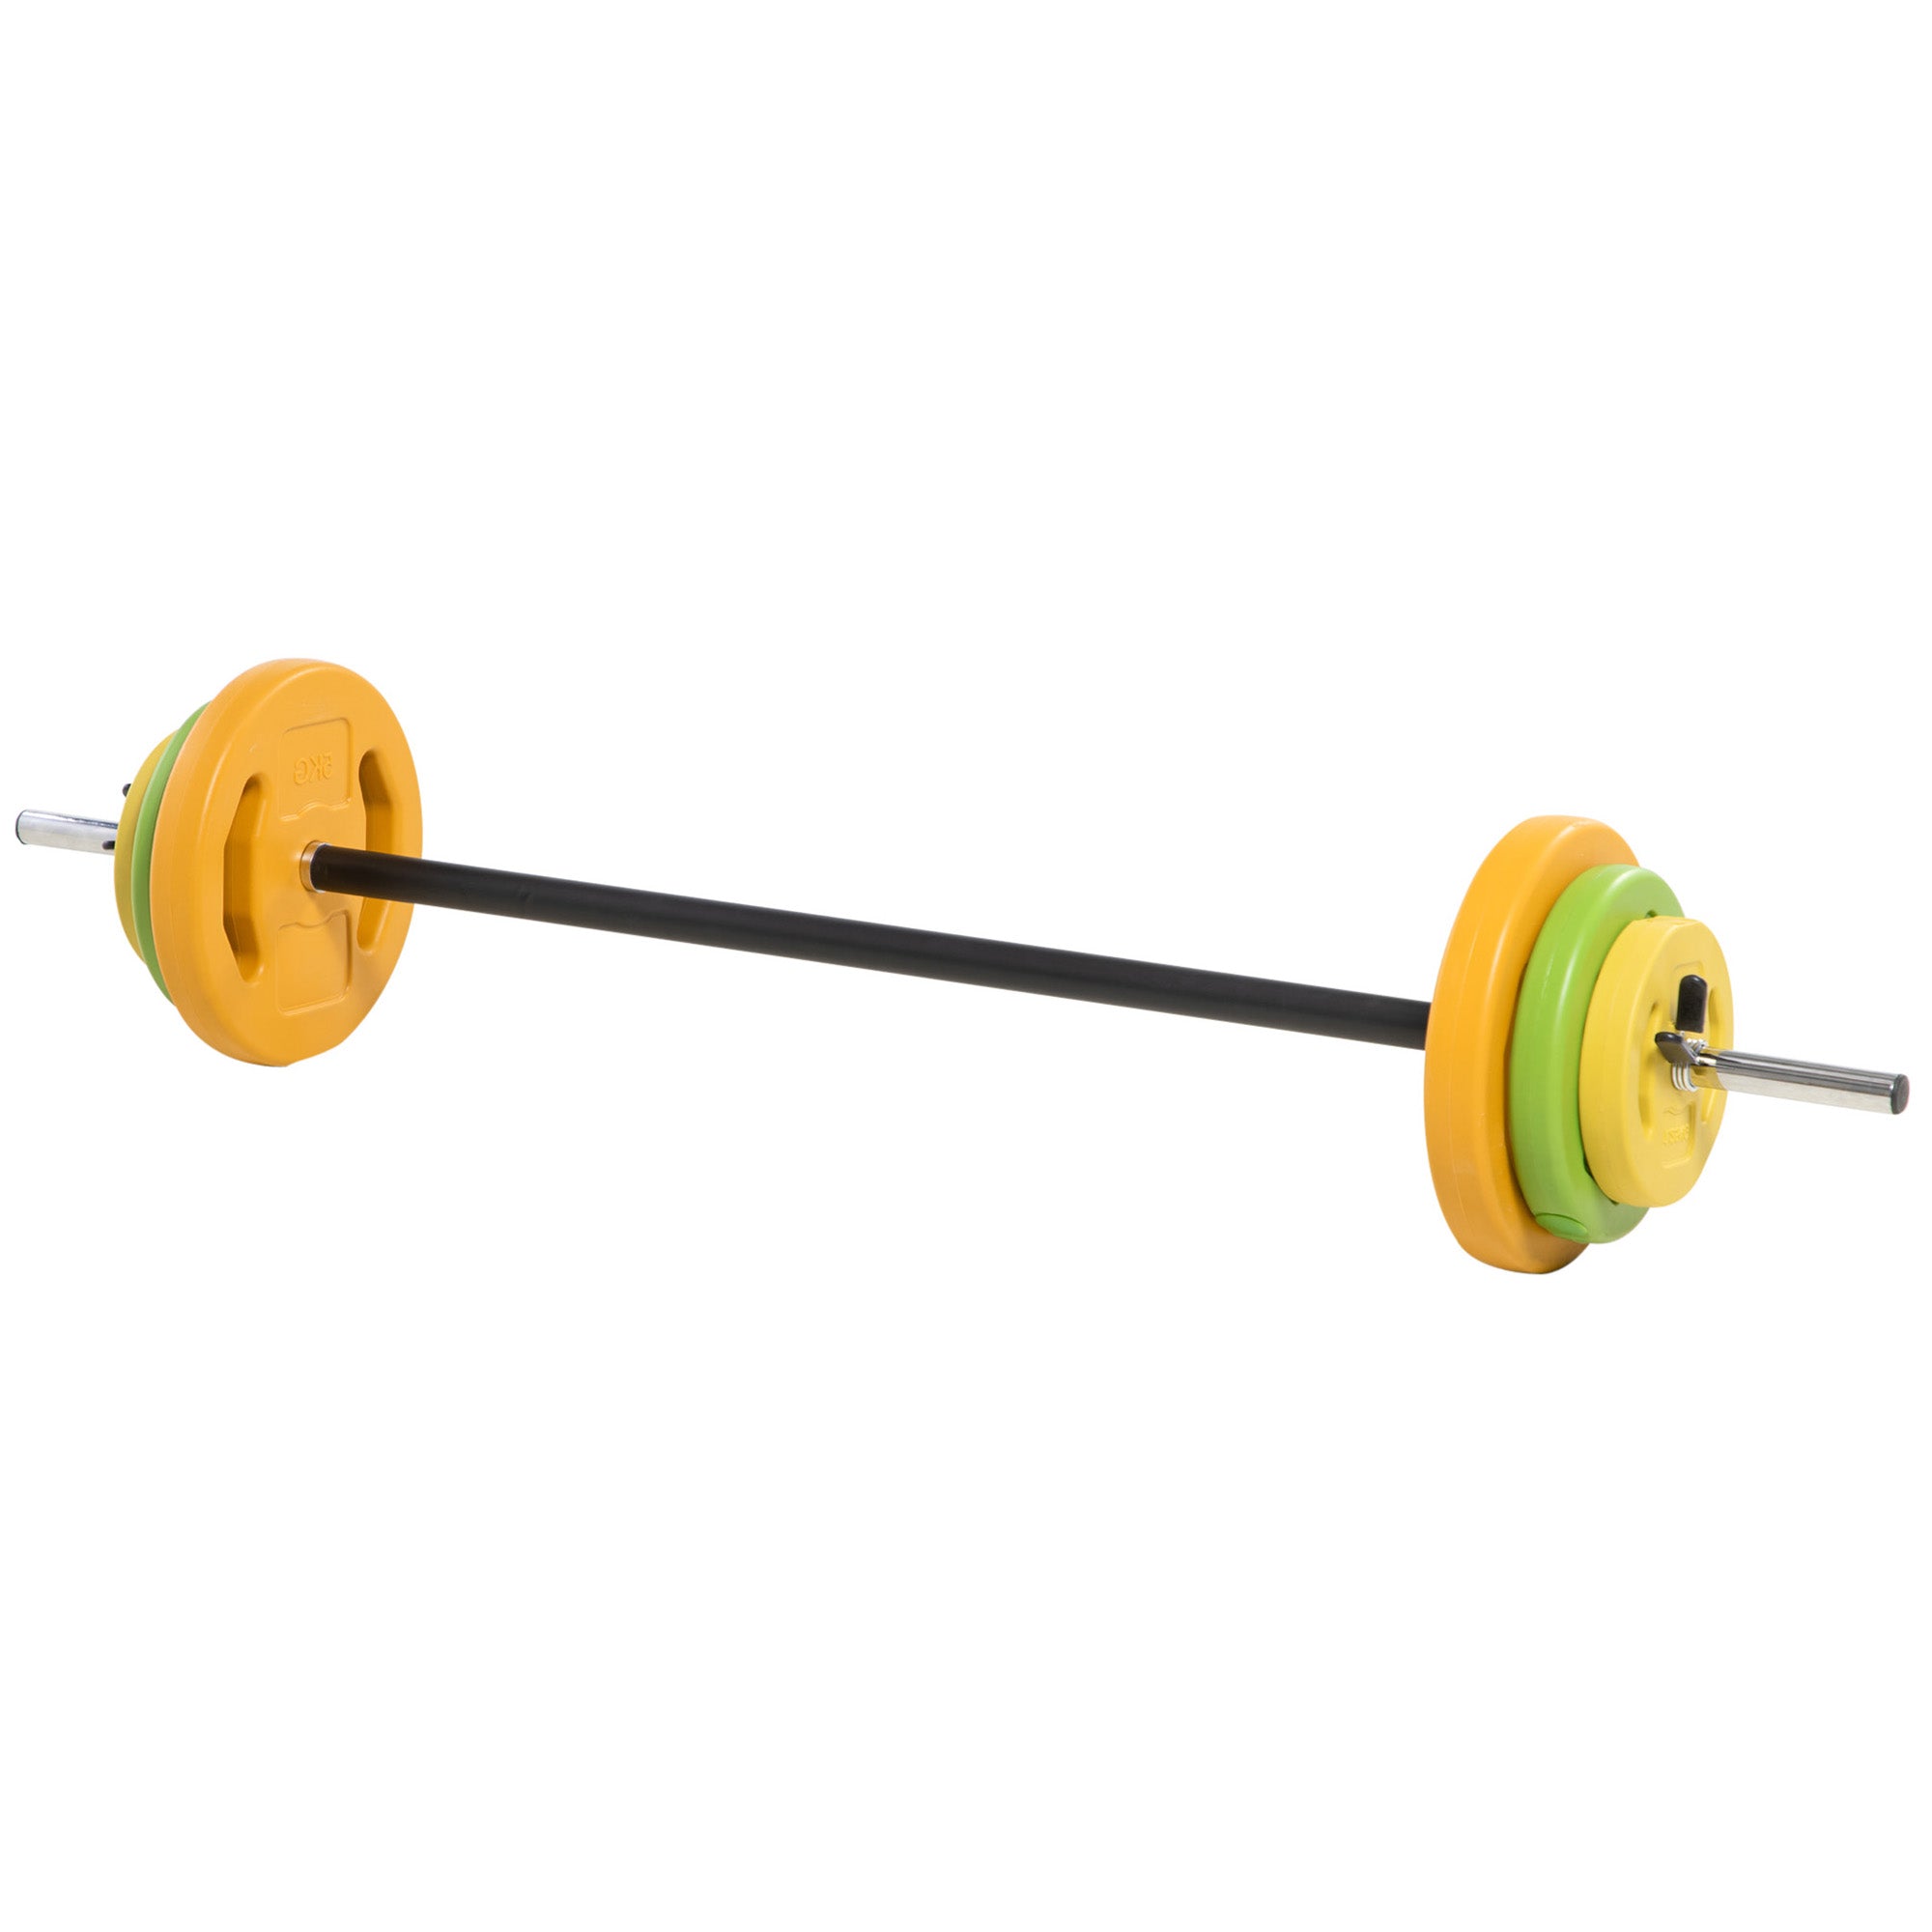 44lbs Adjustable Barbell Weight Set with Non-slip Handle for Home Gym - Gallery Canada